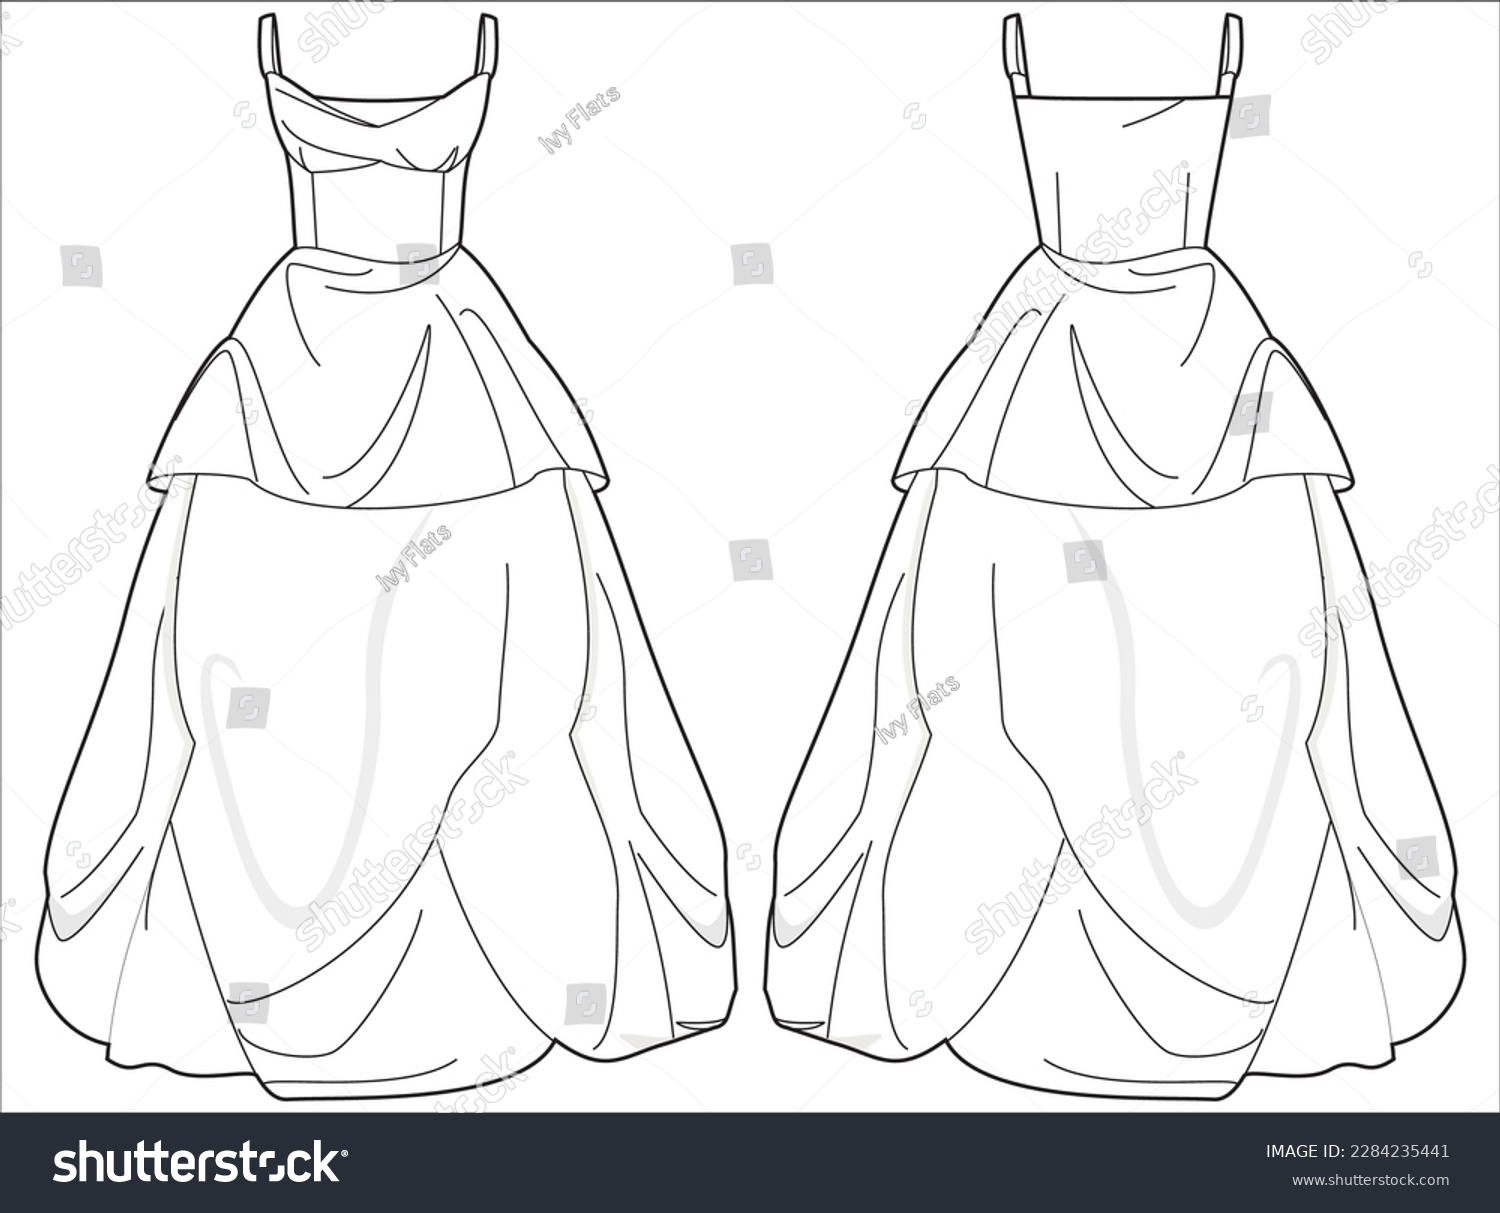 SVG of Bubble ball gown wedding dress design flat sketch fashion illustration with front and back view, Spaghetti Strapped draped bridal dress flat sketch cad drawing template svg